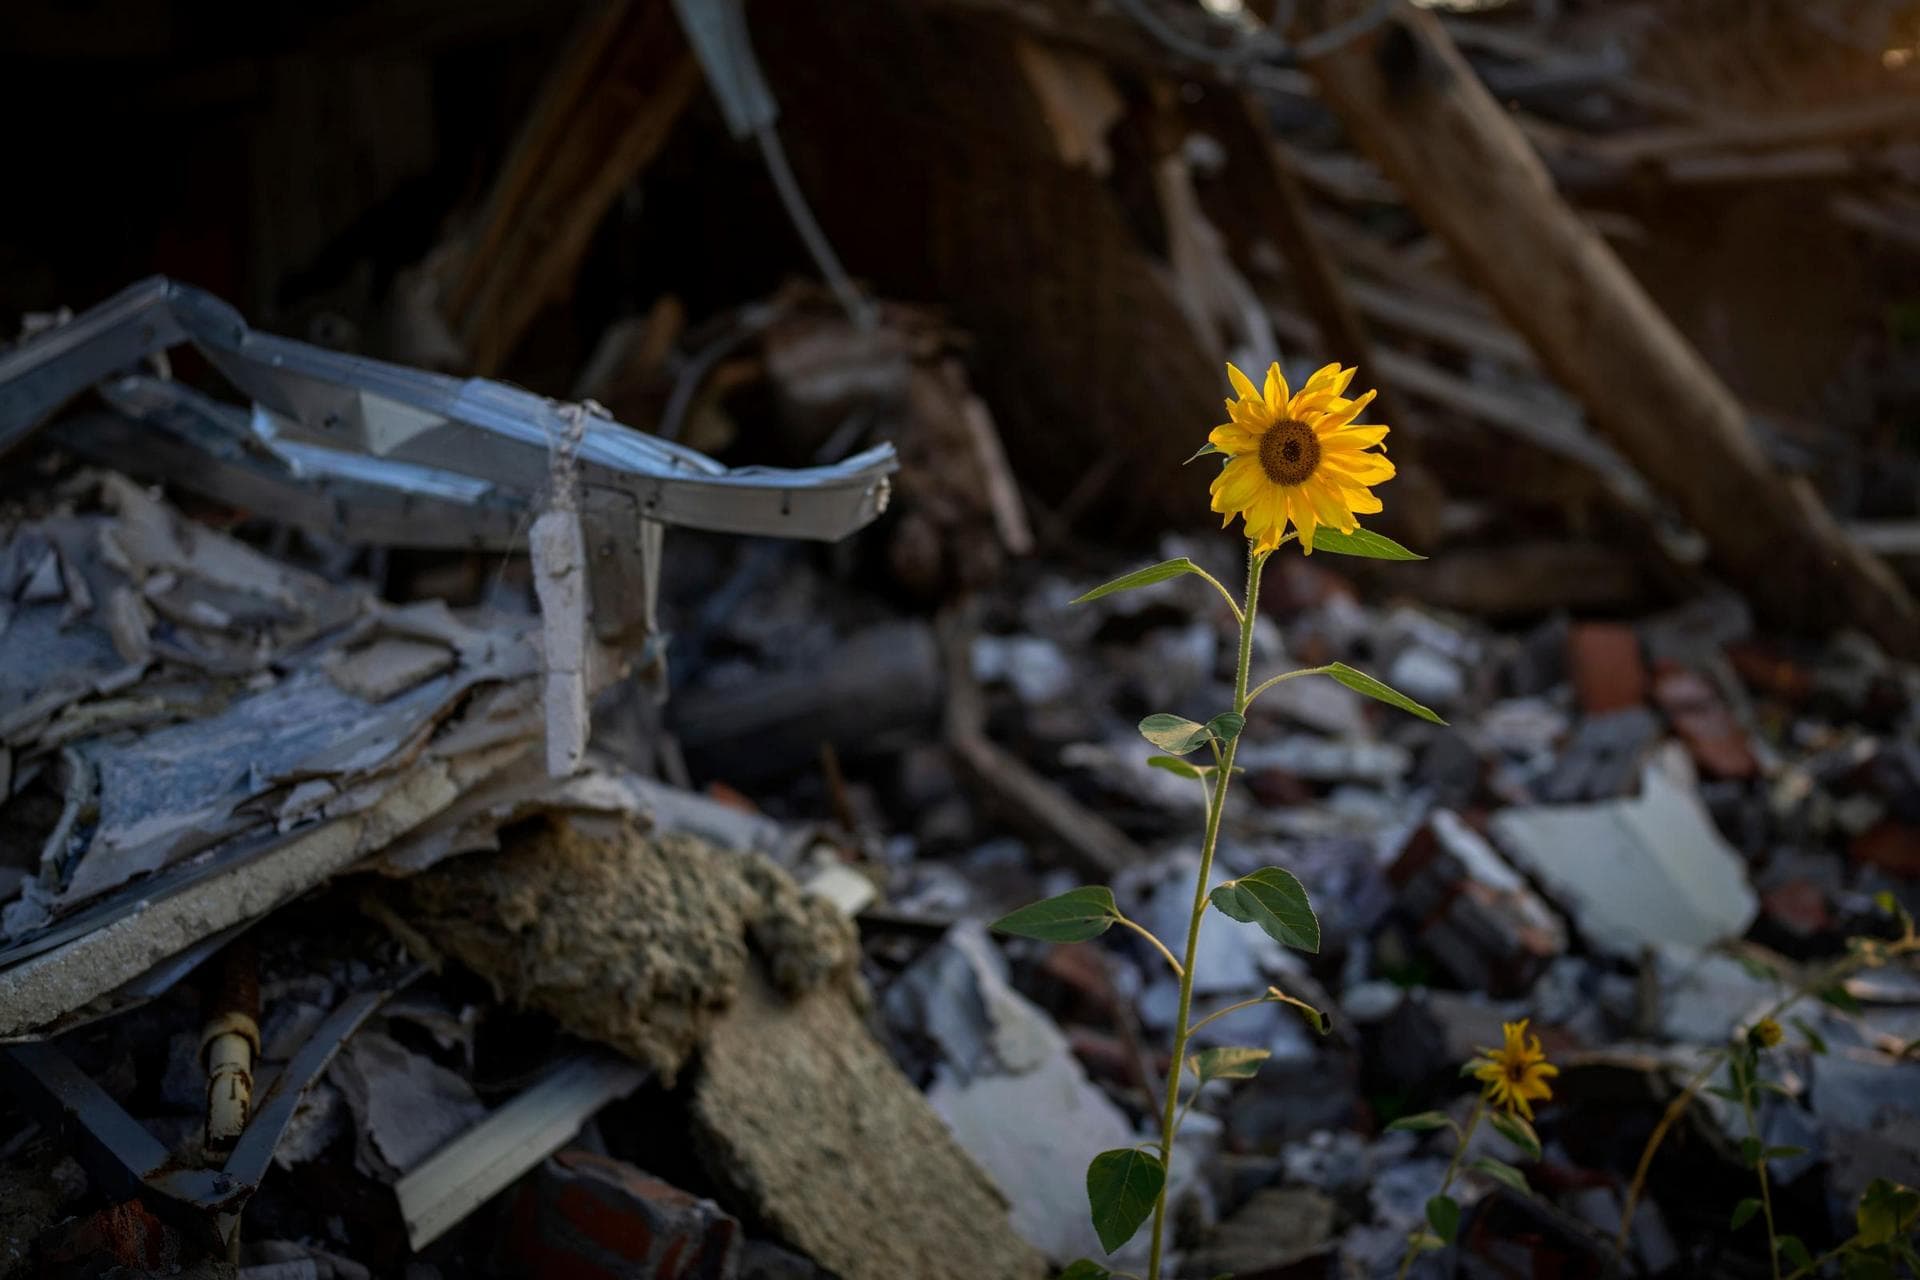 Sunflowers grow amidst the rubble of Vladimir's house after being bombed by Russians in Chernihiv